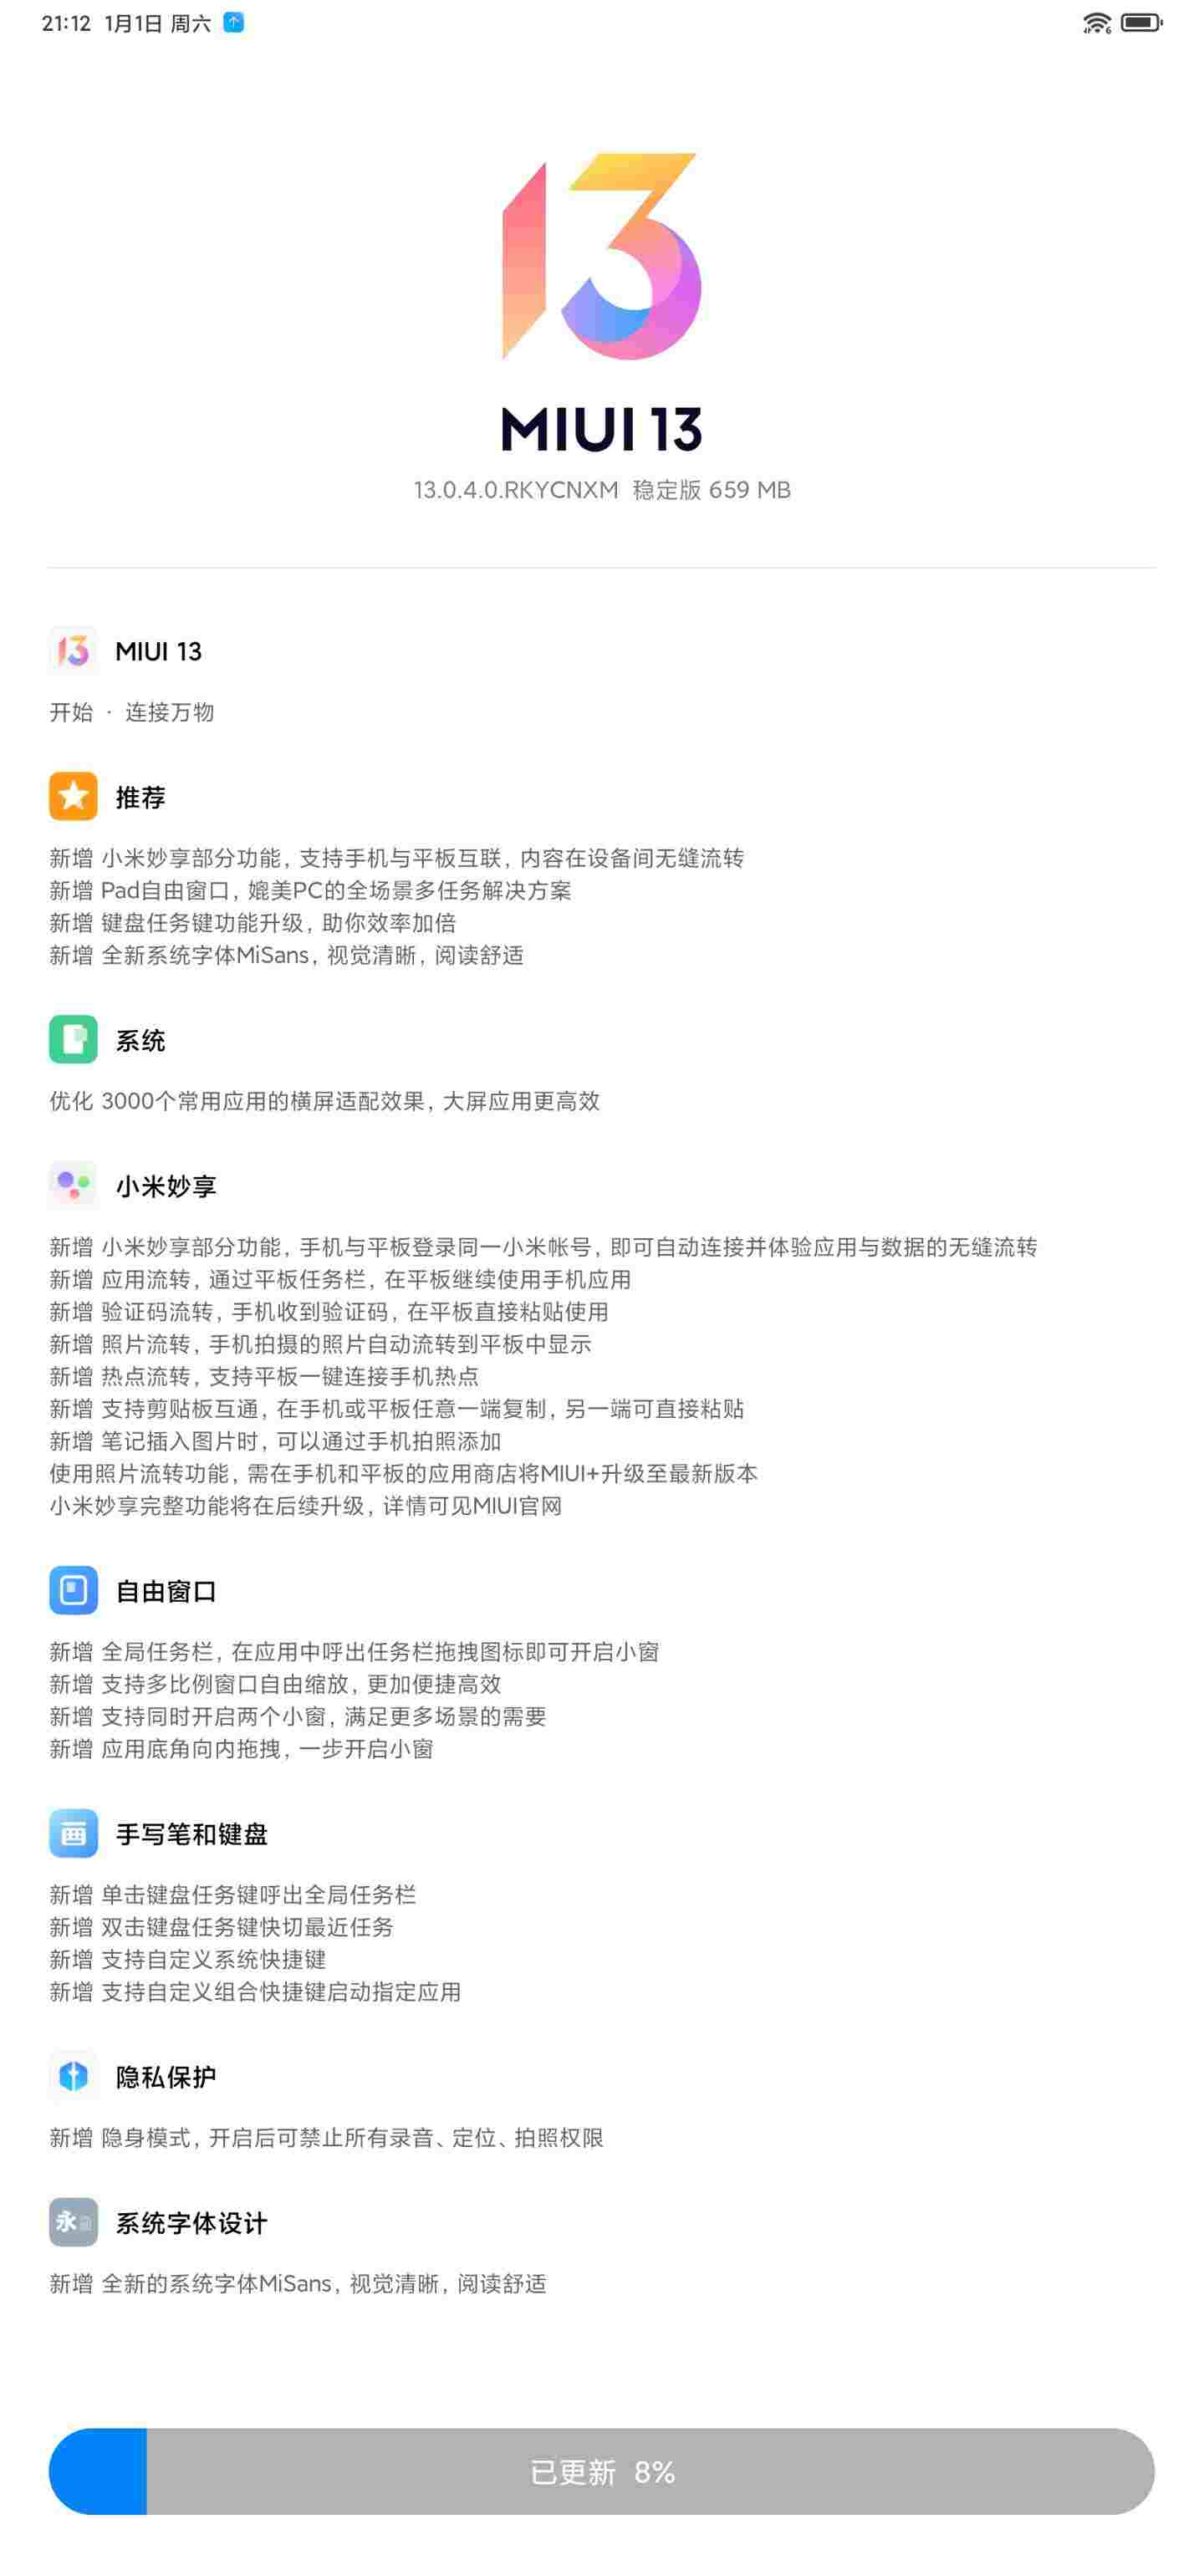 Stable MIUI 13 update released